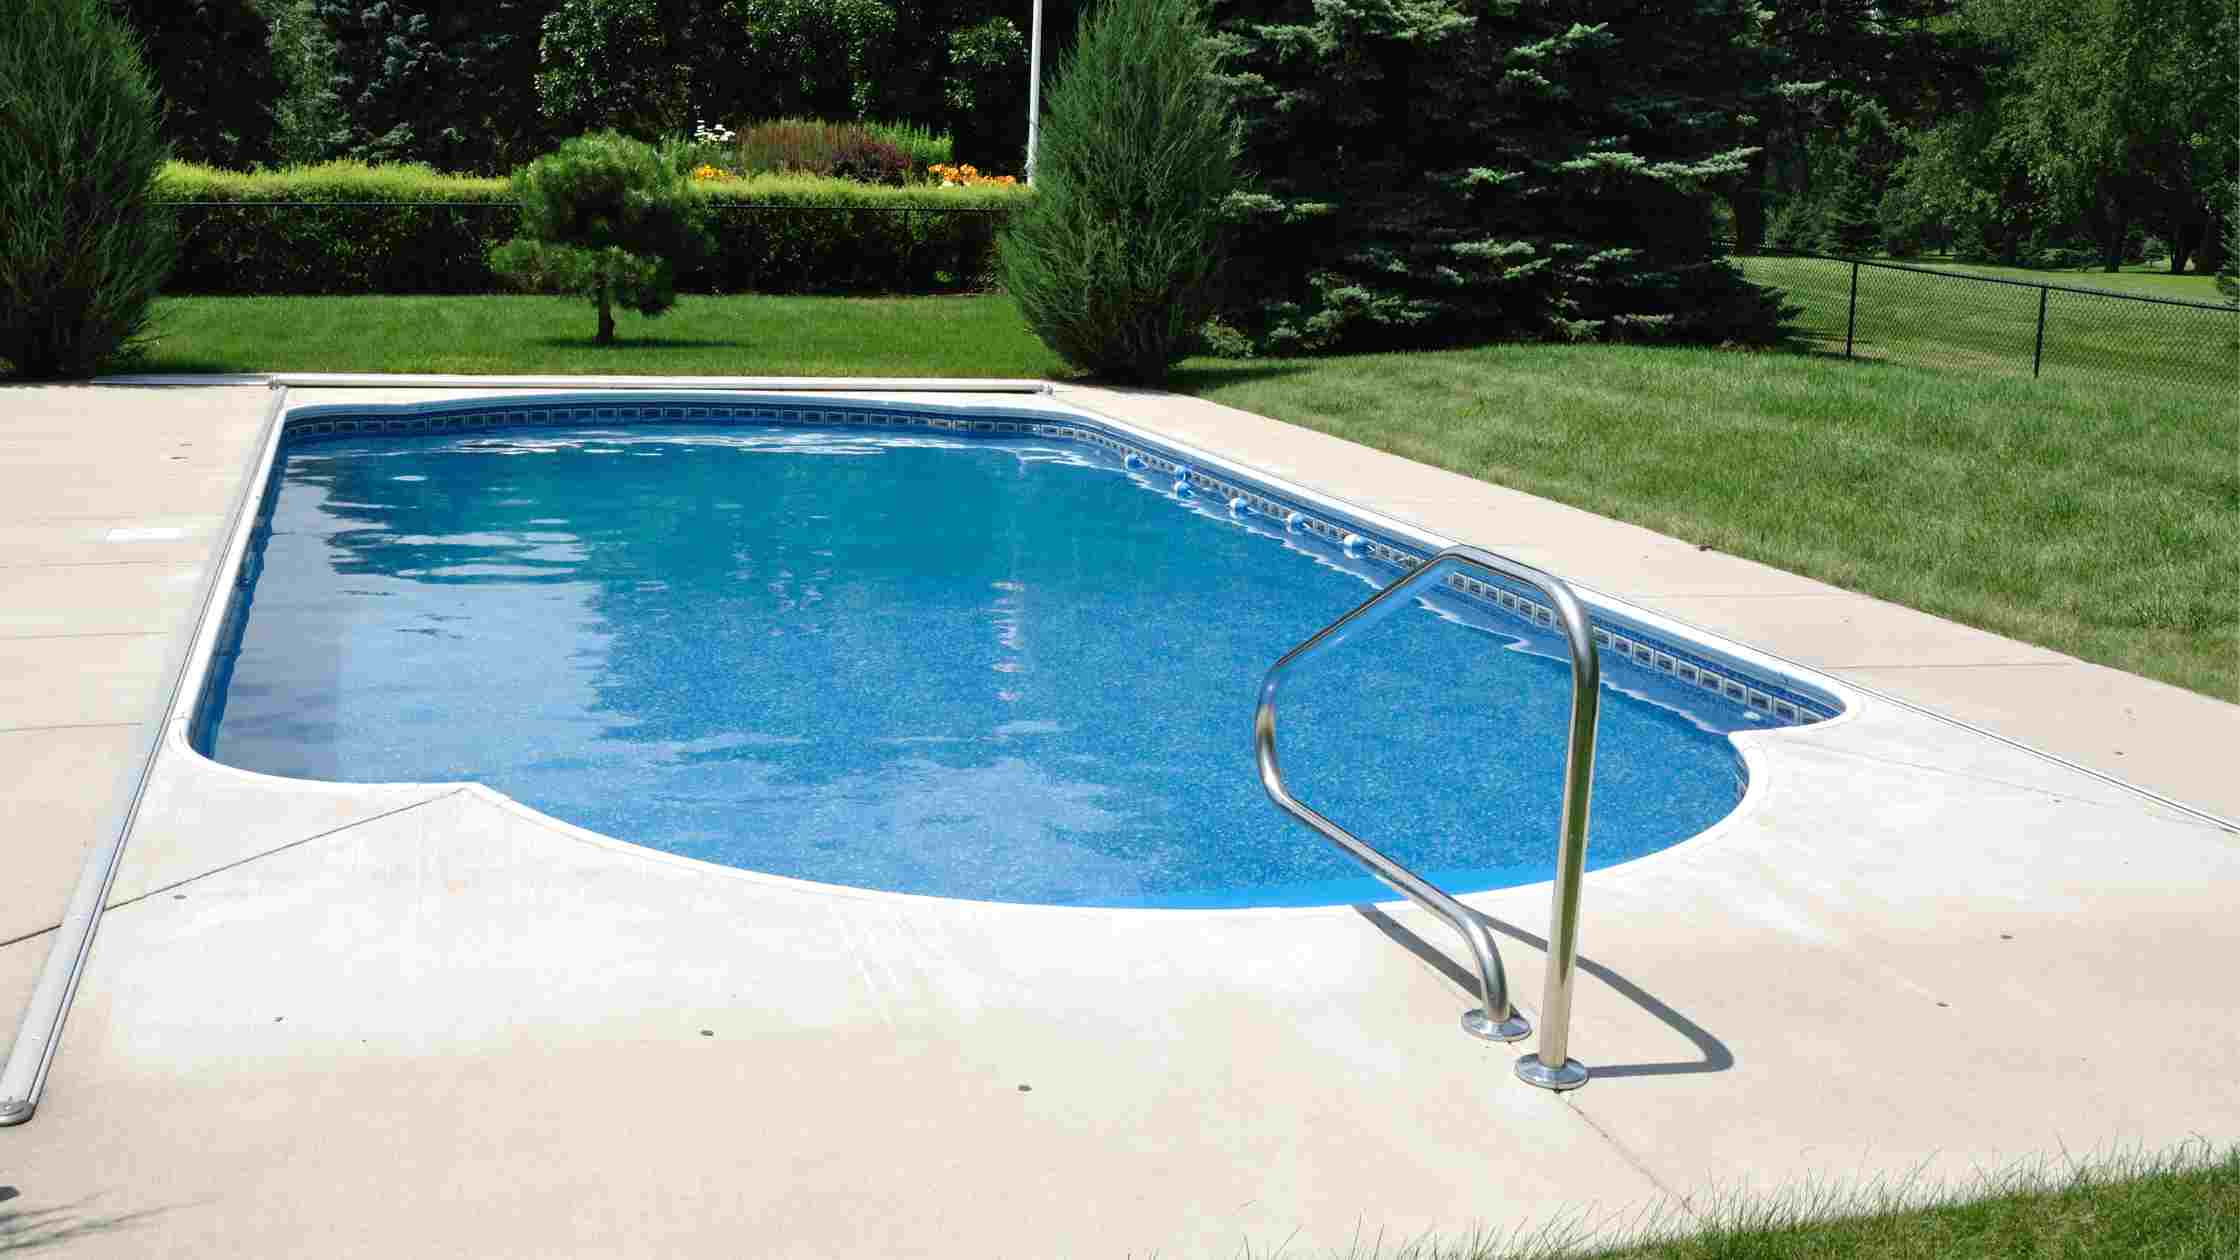 How To Level Ground For Pool: